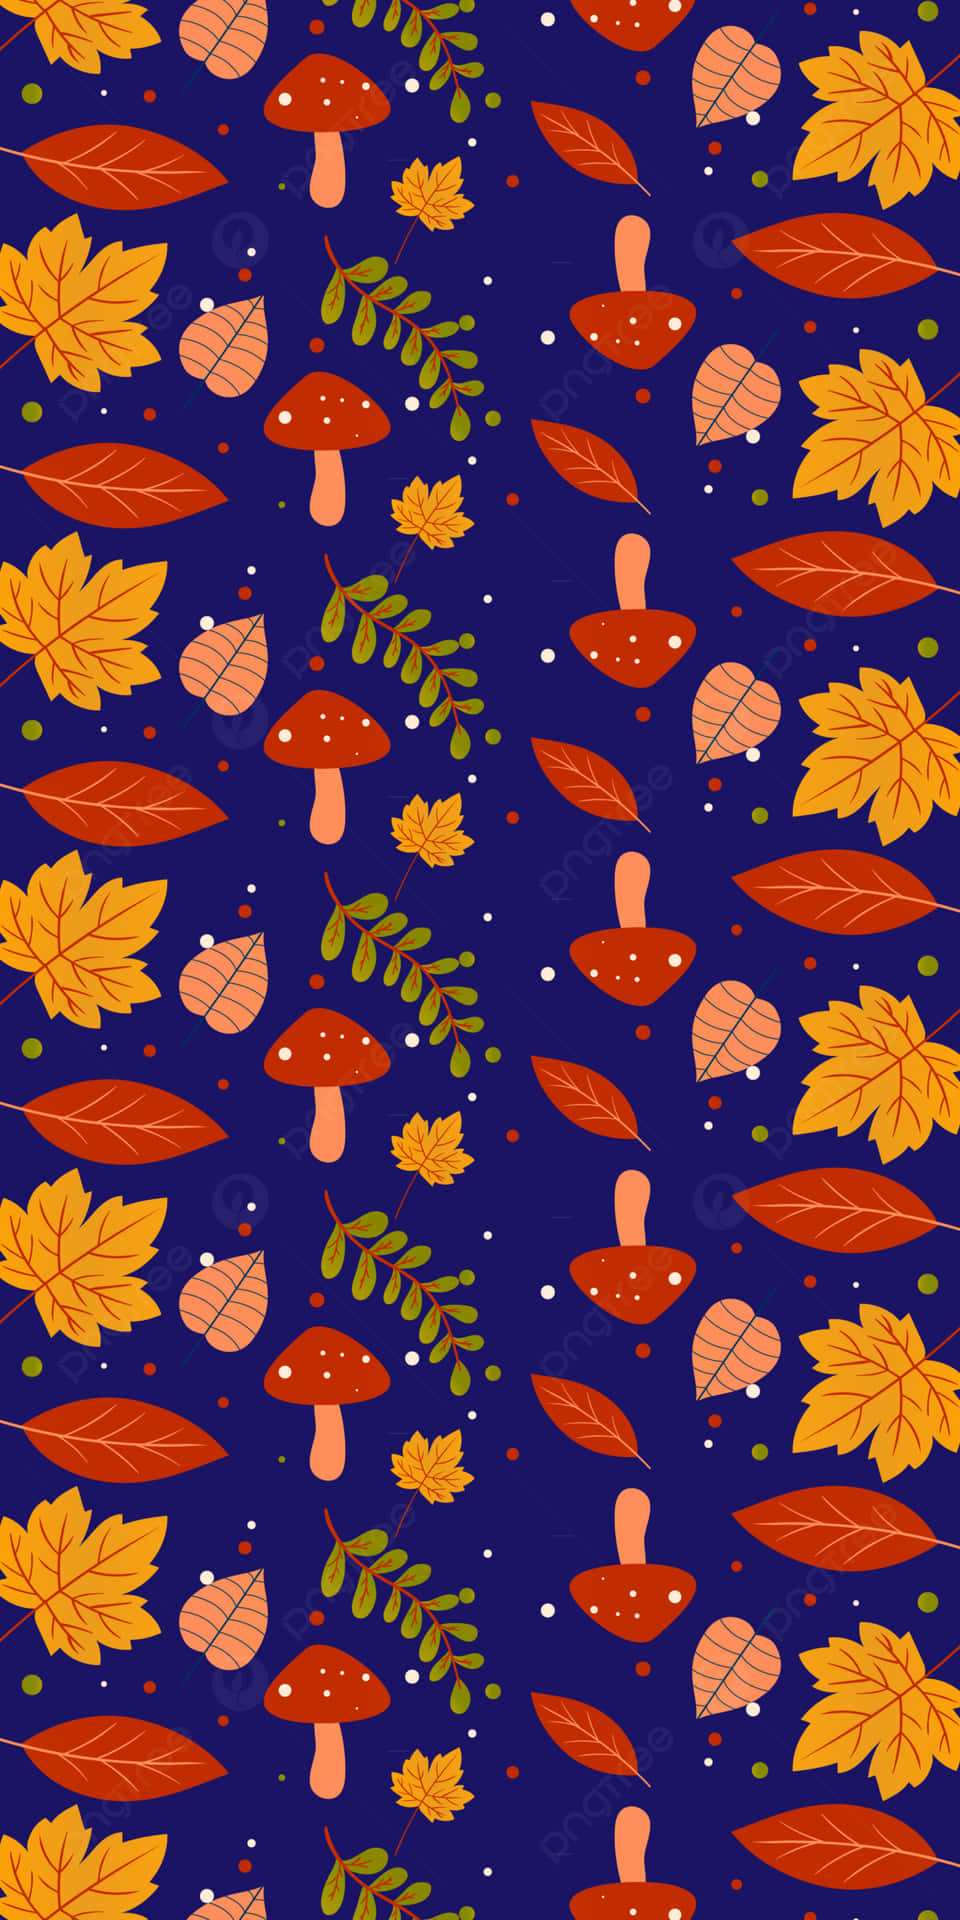 Get ready for Autumn with this cute Iphone Wallpaper